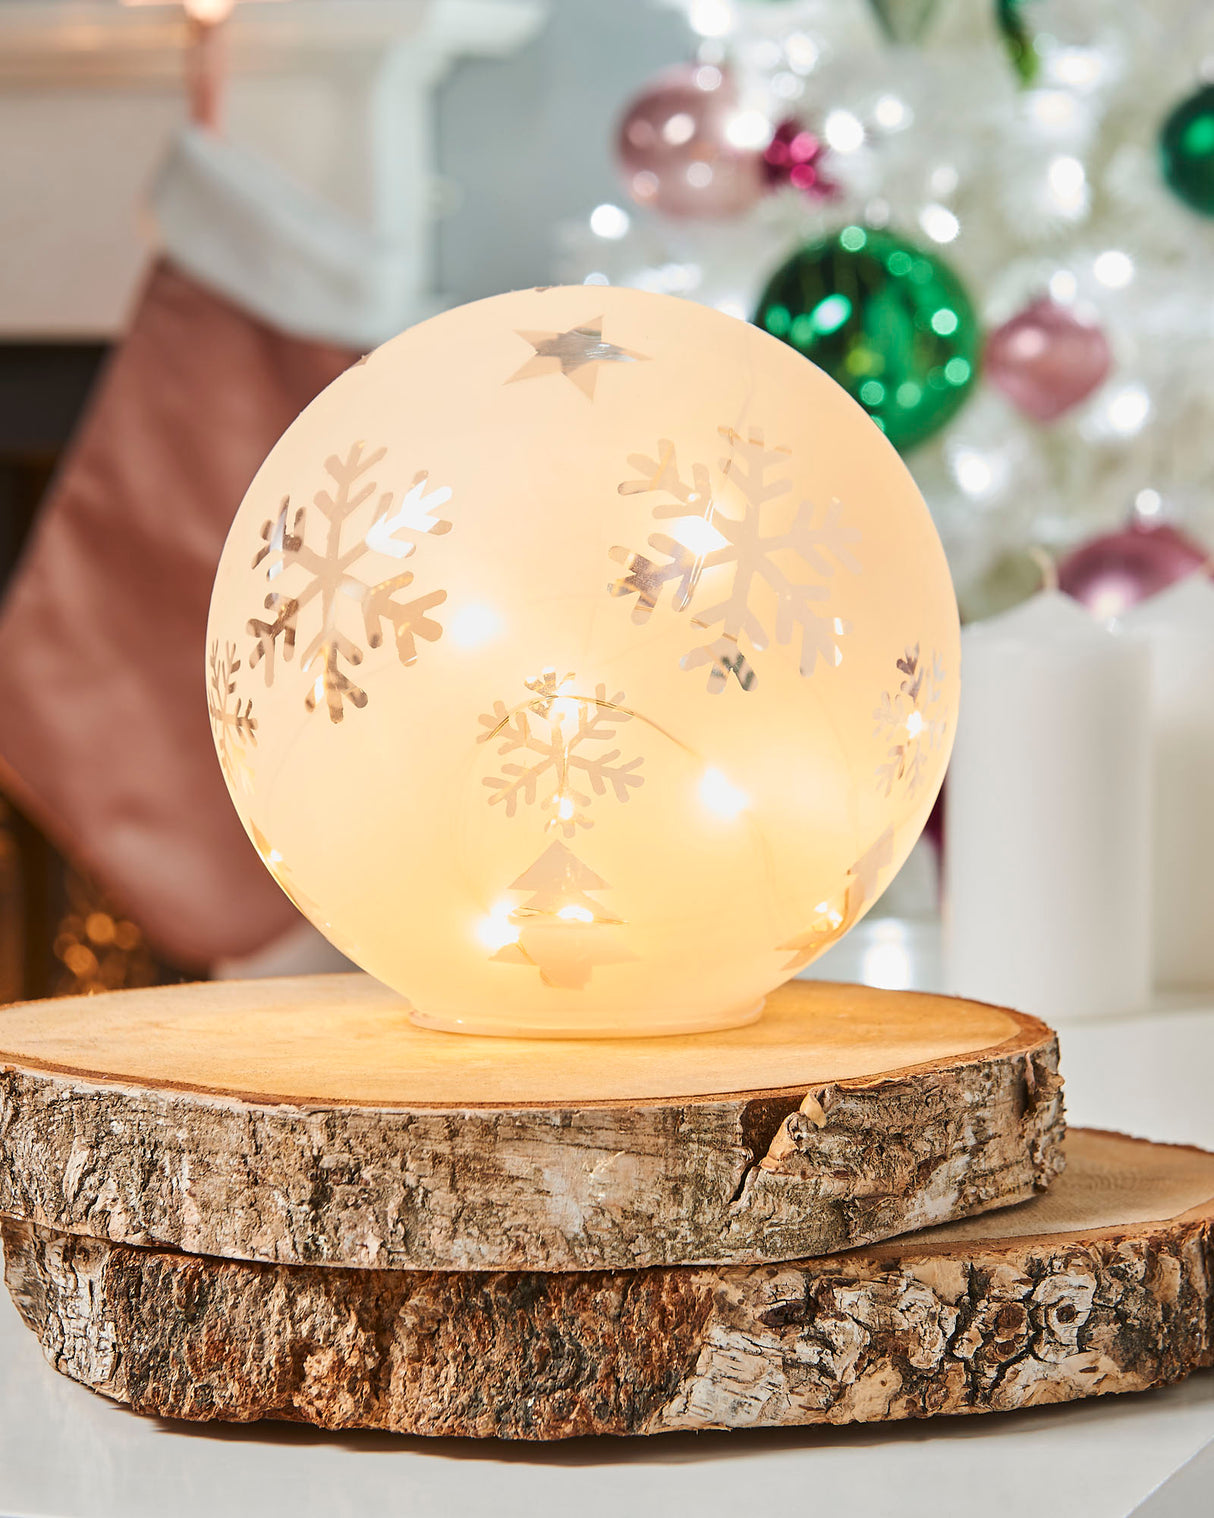 Frosted Glass Snowflake Lamp, 15 cm